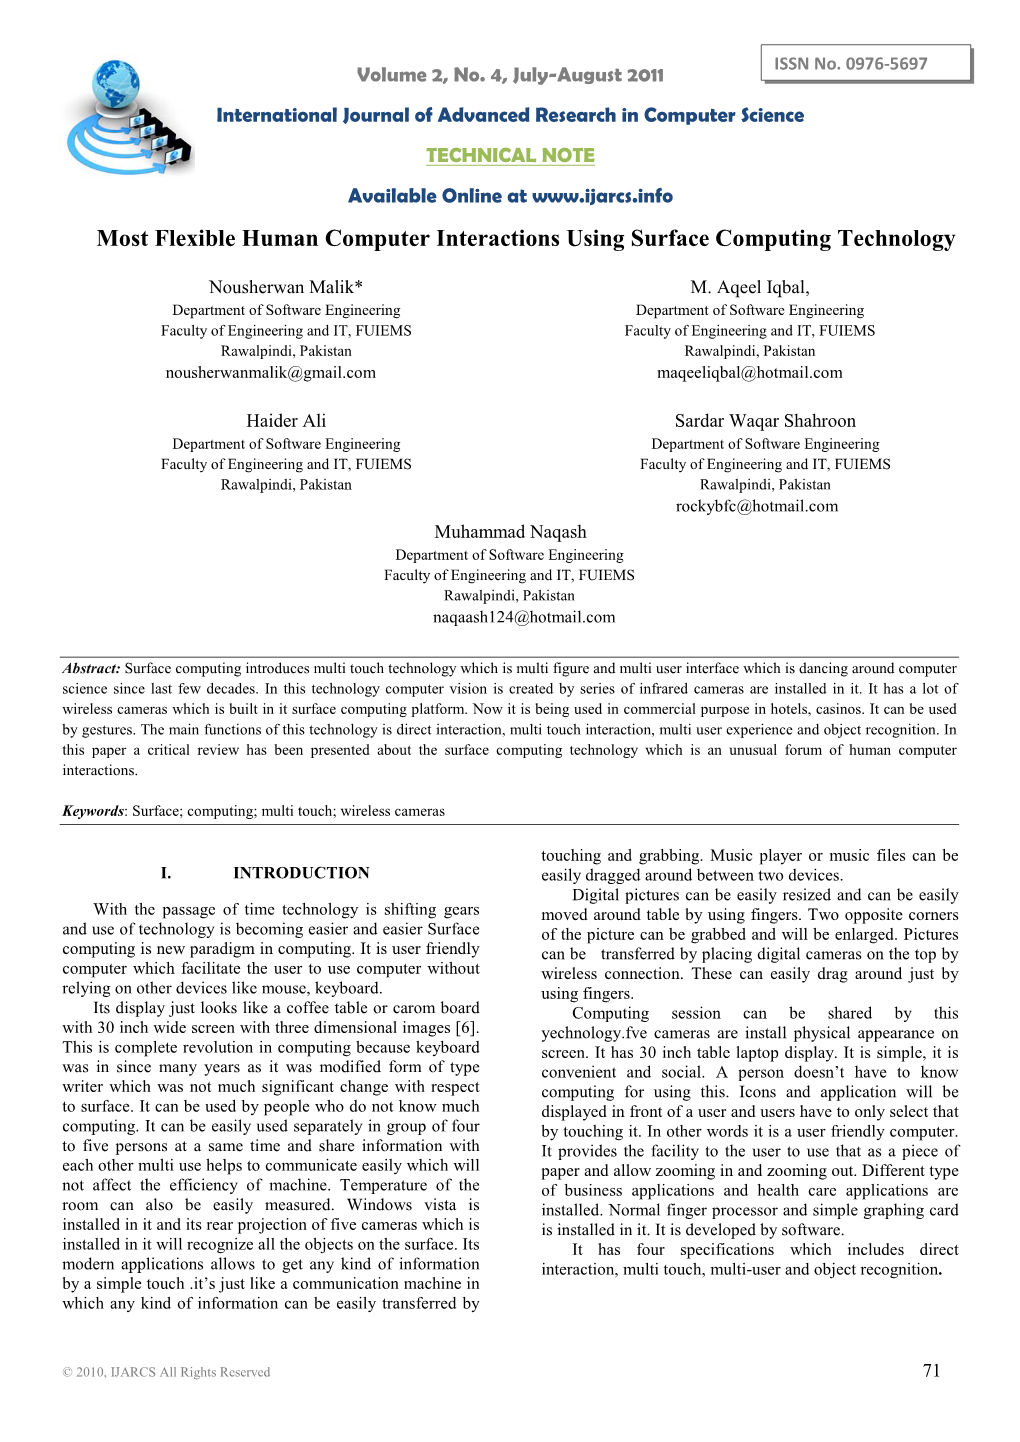 Most Flexible Human Computer Interactions Using Surface Computing Technology